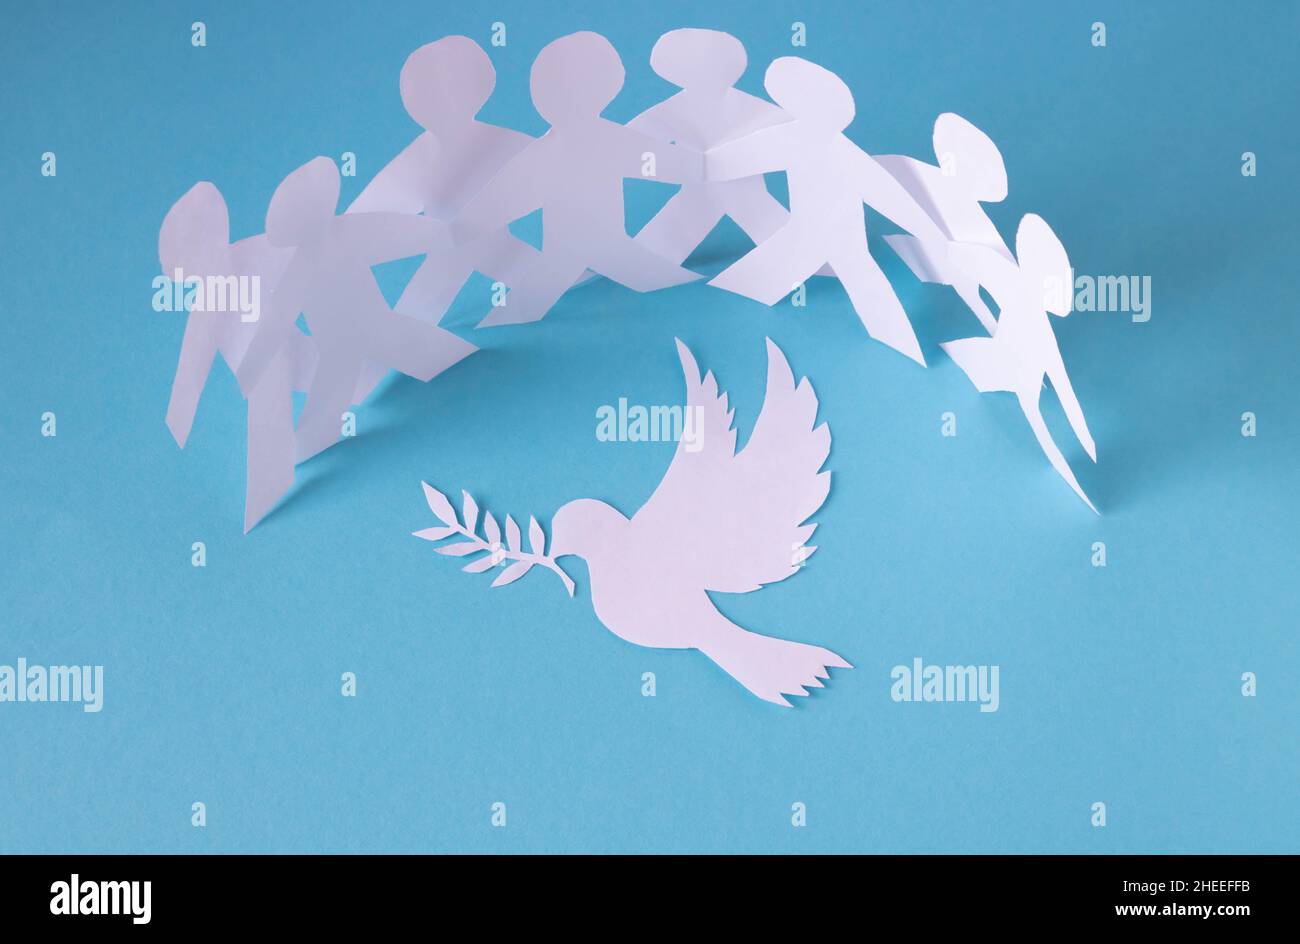 People cut out of paper on a blue background protect the dove of peace.The concept of the World Peace Day. Stock Photo